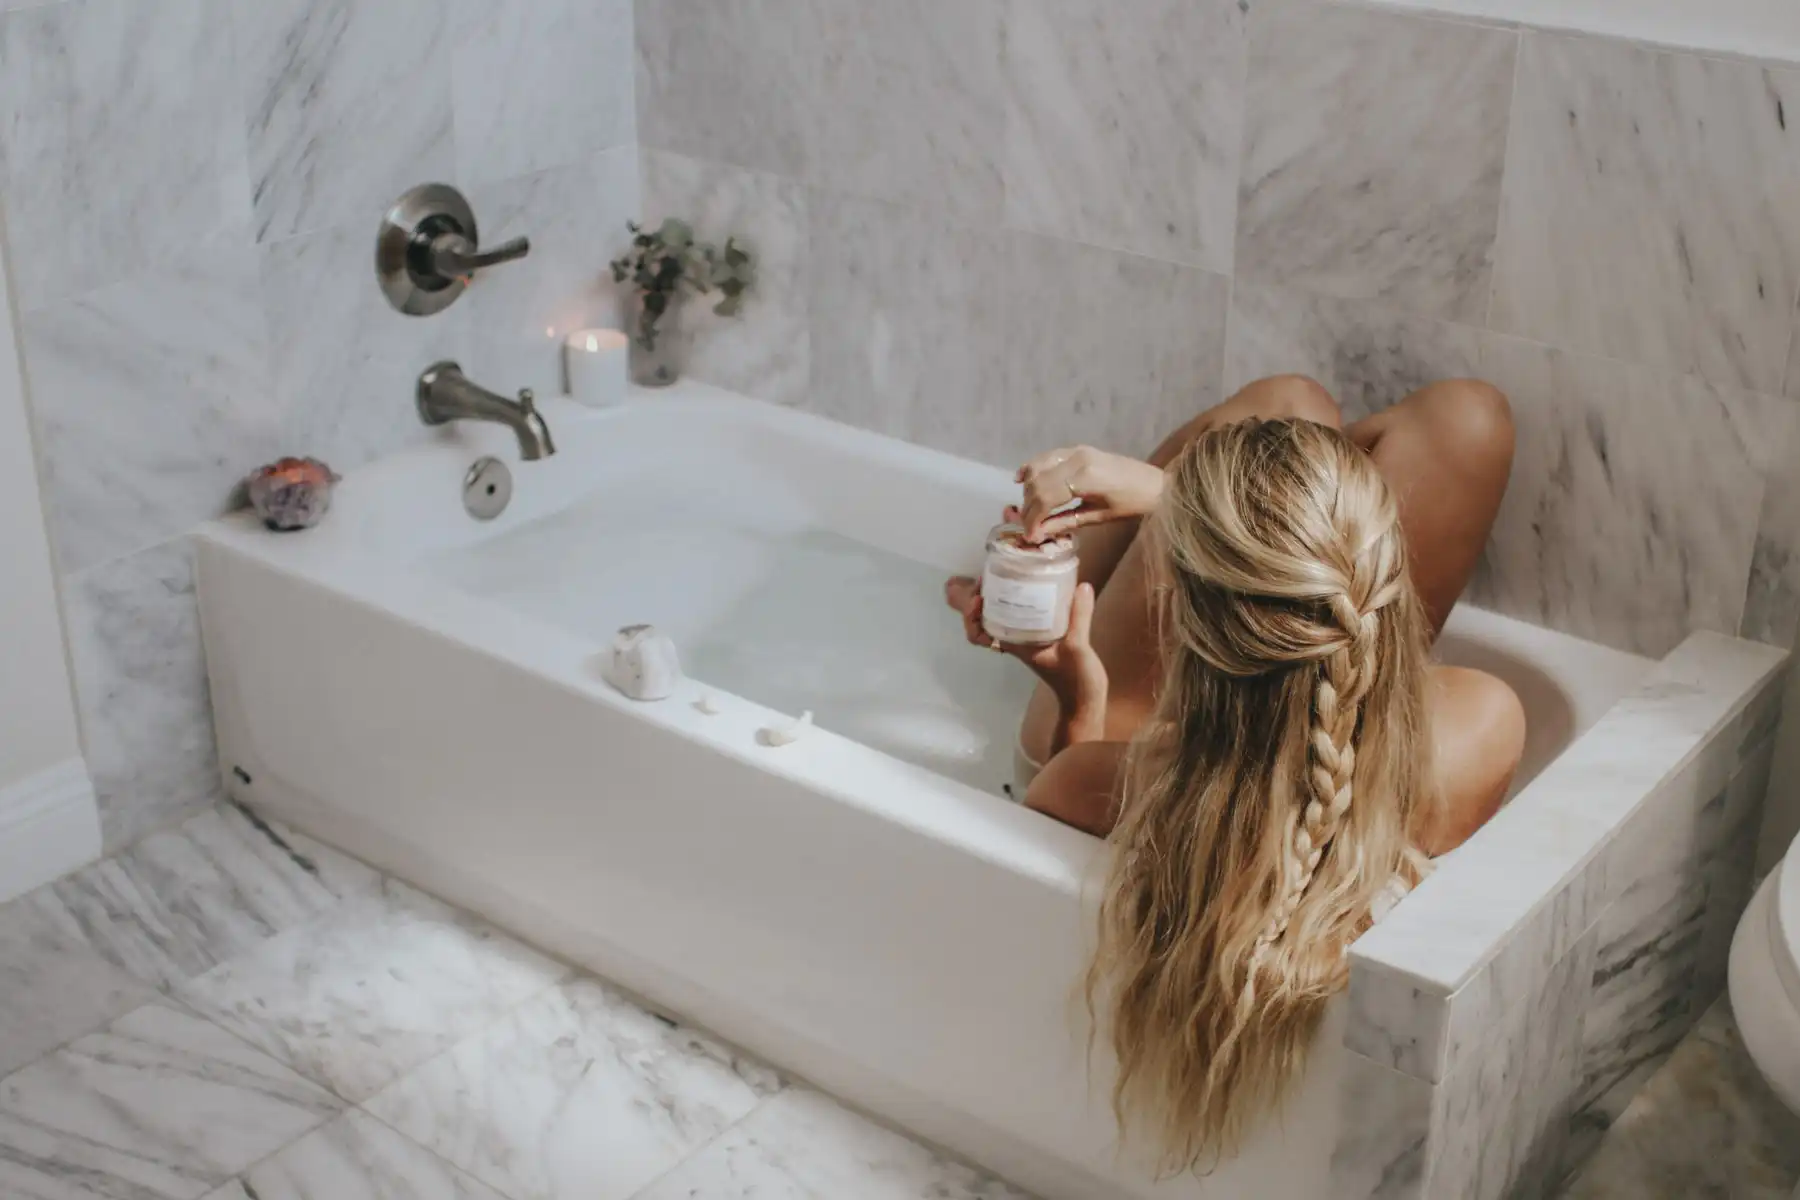 Girl holding a pinch of Himalayan salt above a bathtub filled with steaming water, ready to add it for a relaxing bath